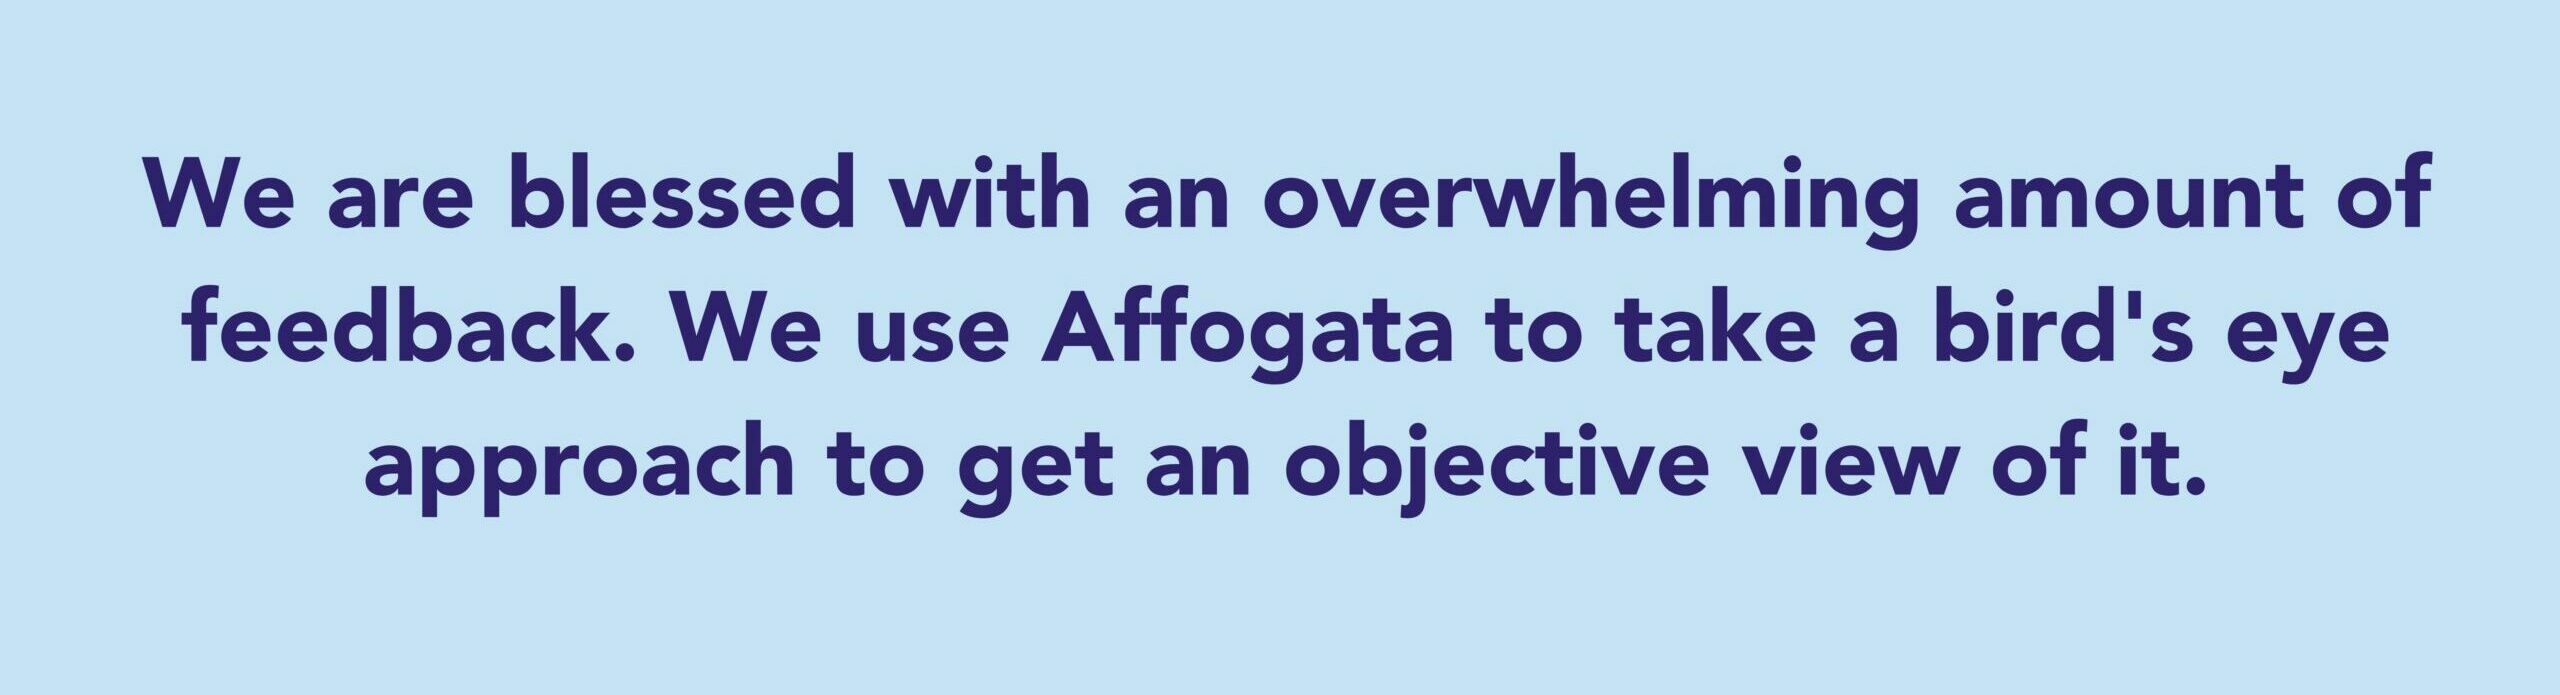 The quote says: We are blessed with an overwhelming amount of feedback. We use Affogata to take a bird's eye approach to get an objective view of it.